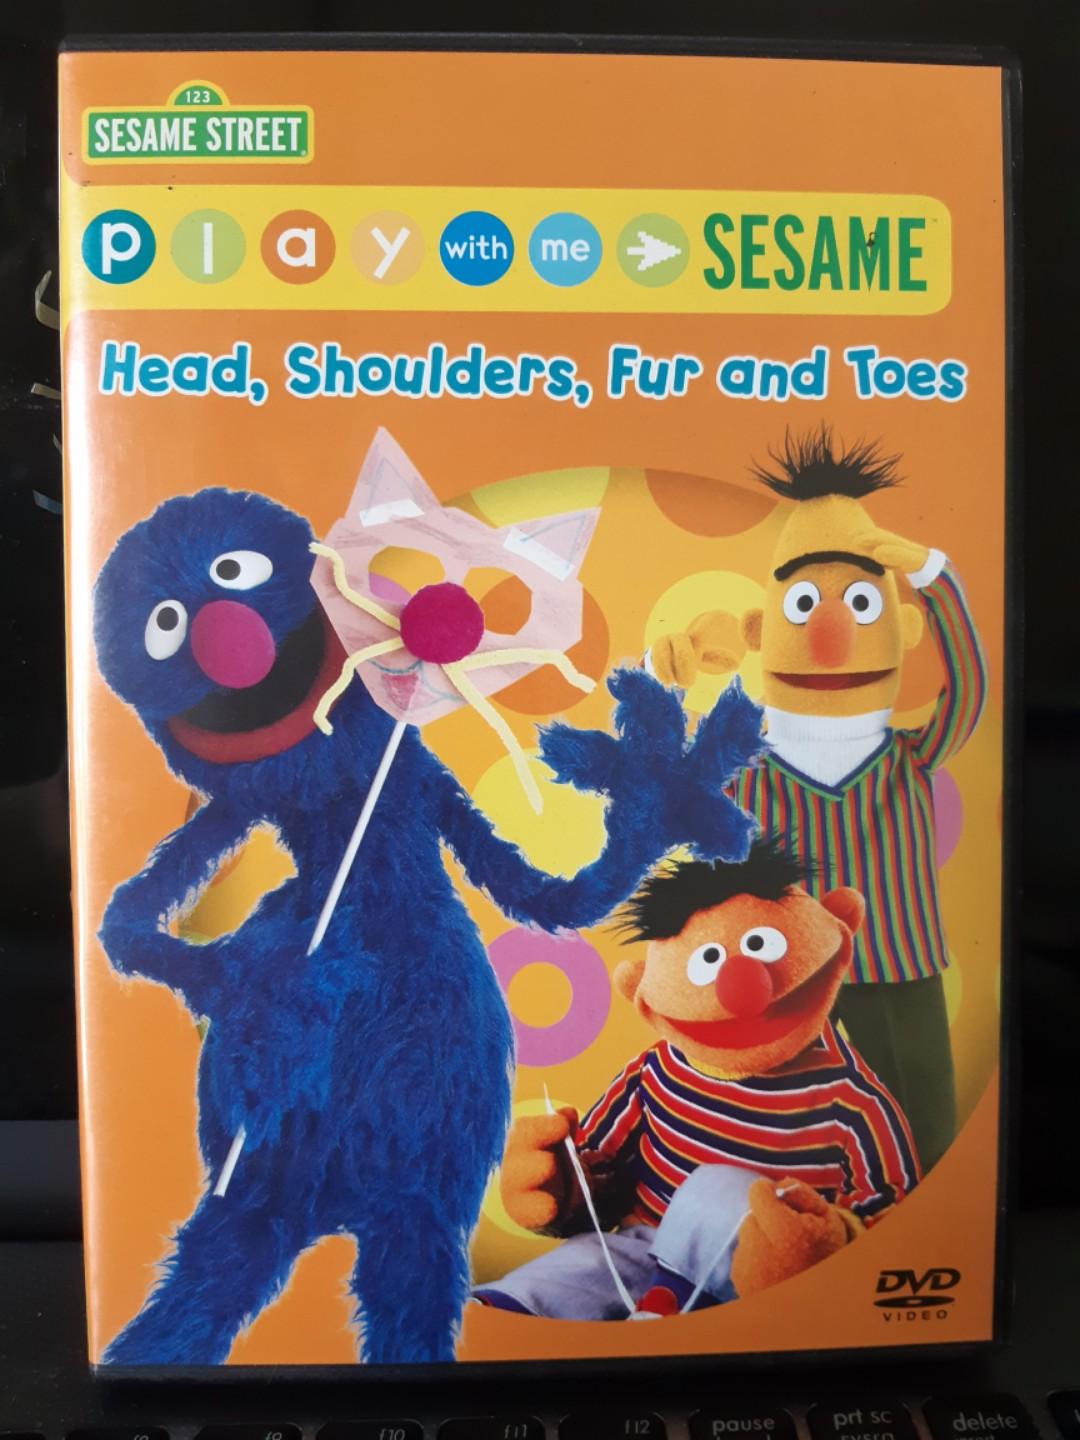 Play With Me Sesame - Playtime With Grover, DVD, Buy Now